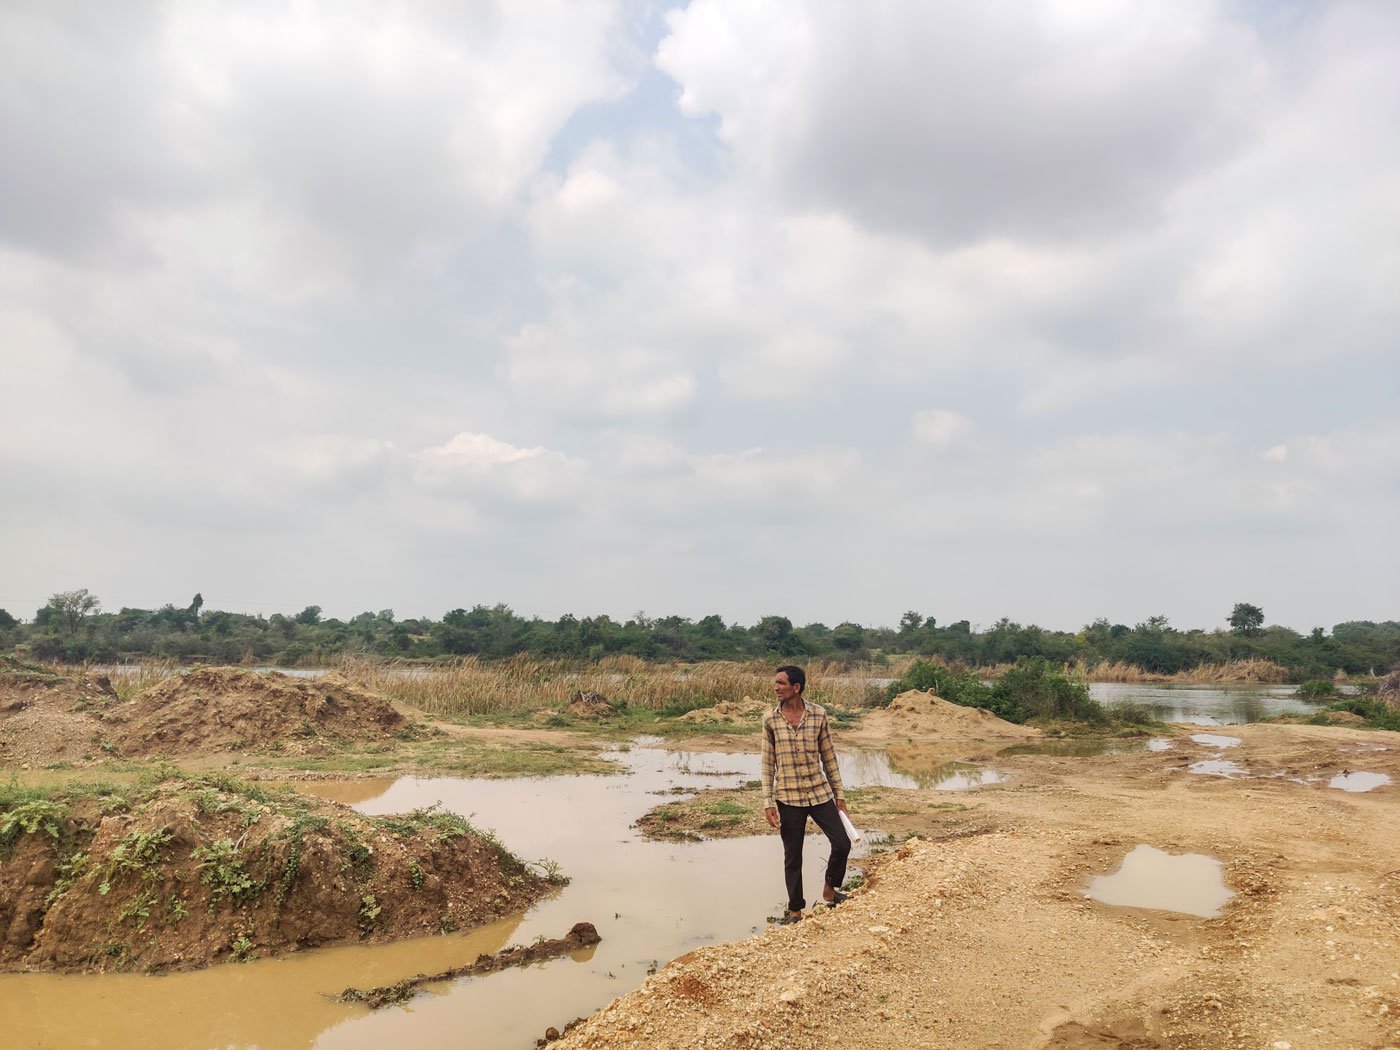 Chhaganbhai Pitambar standing on the land allotted to him in the middle of Chandrabhaga river in Surendranagar district